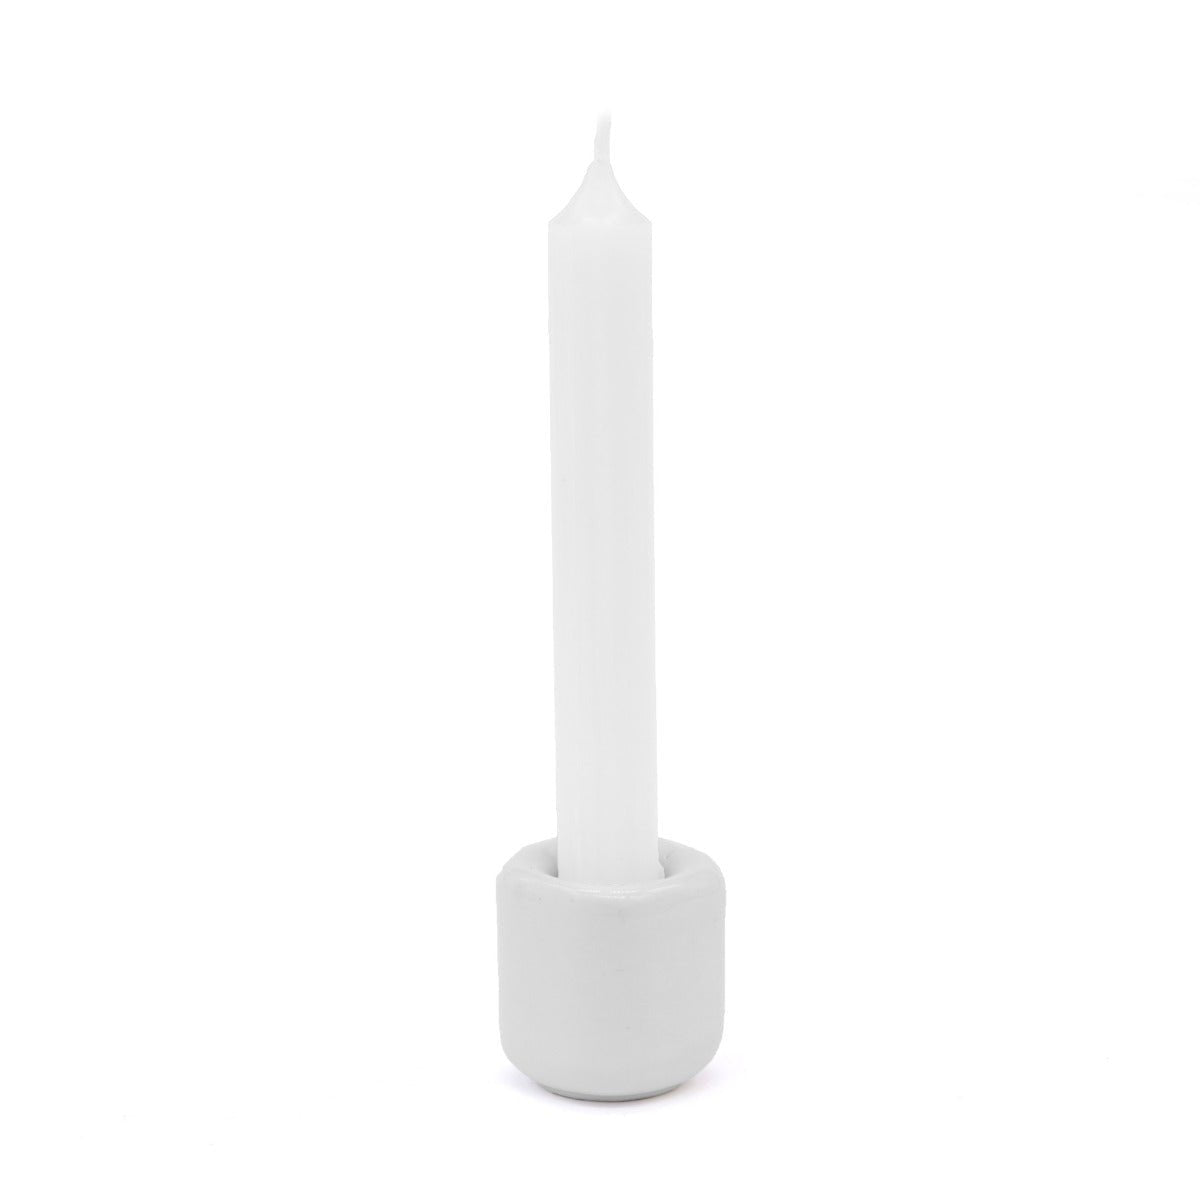 Chime Candle White Single - 13 Moons